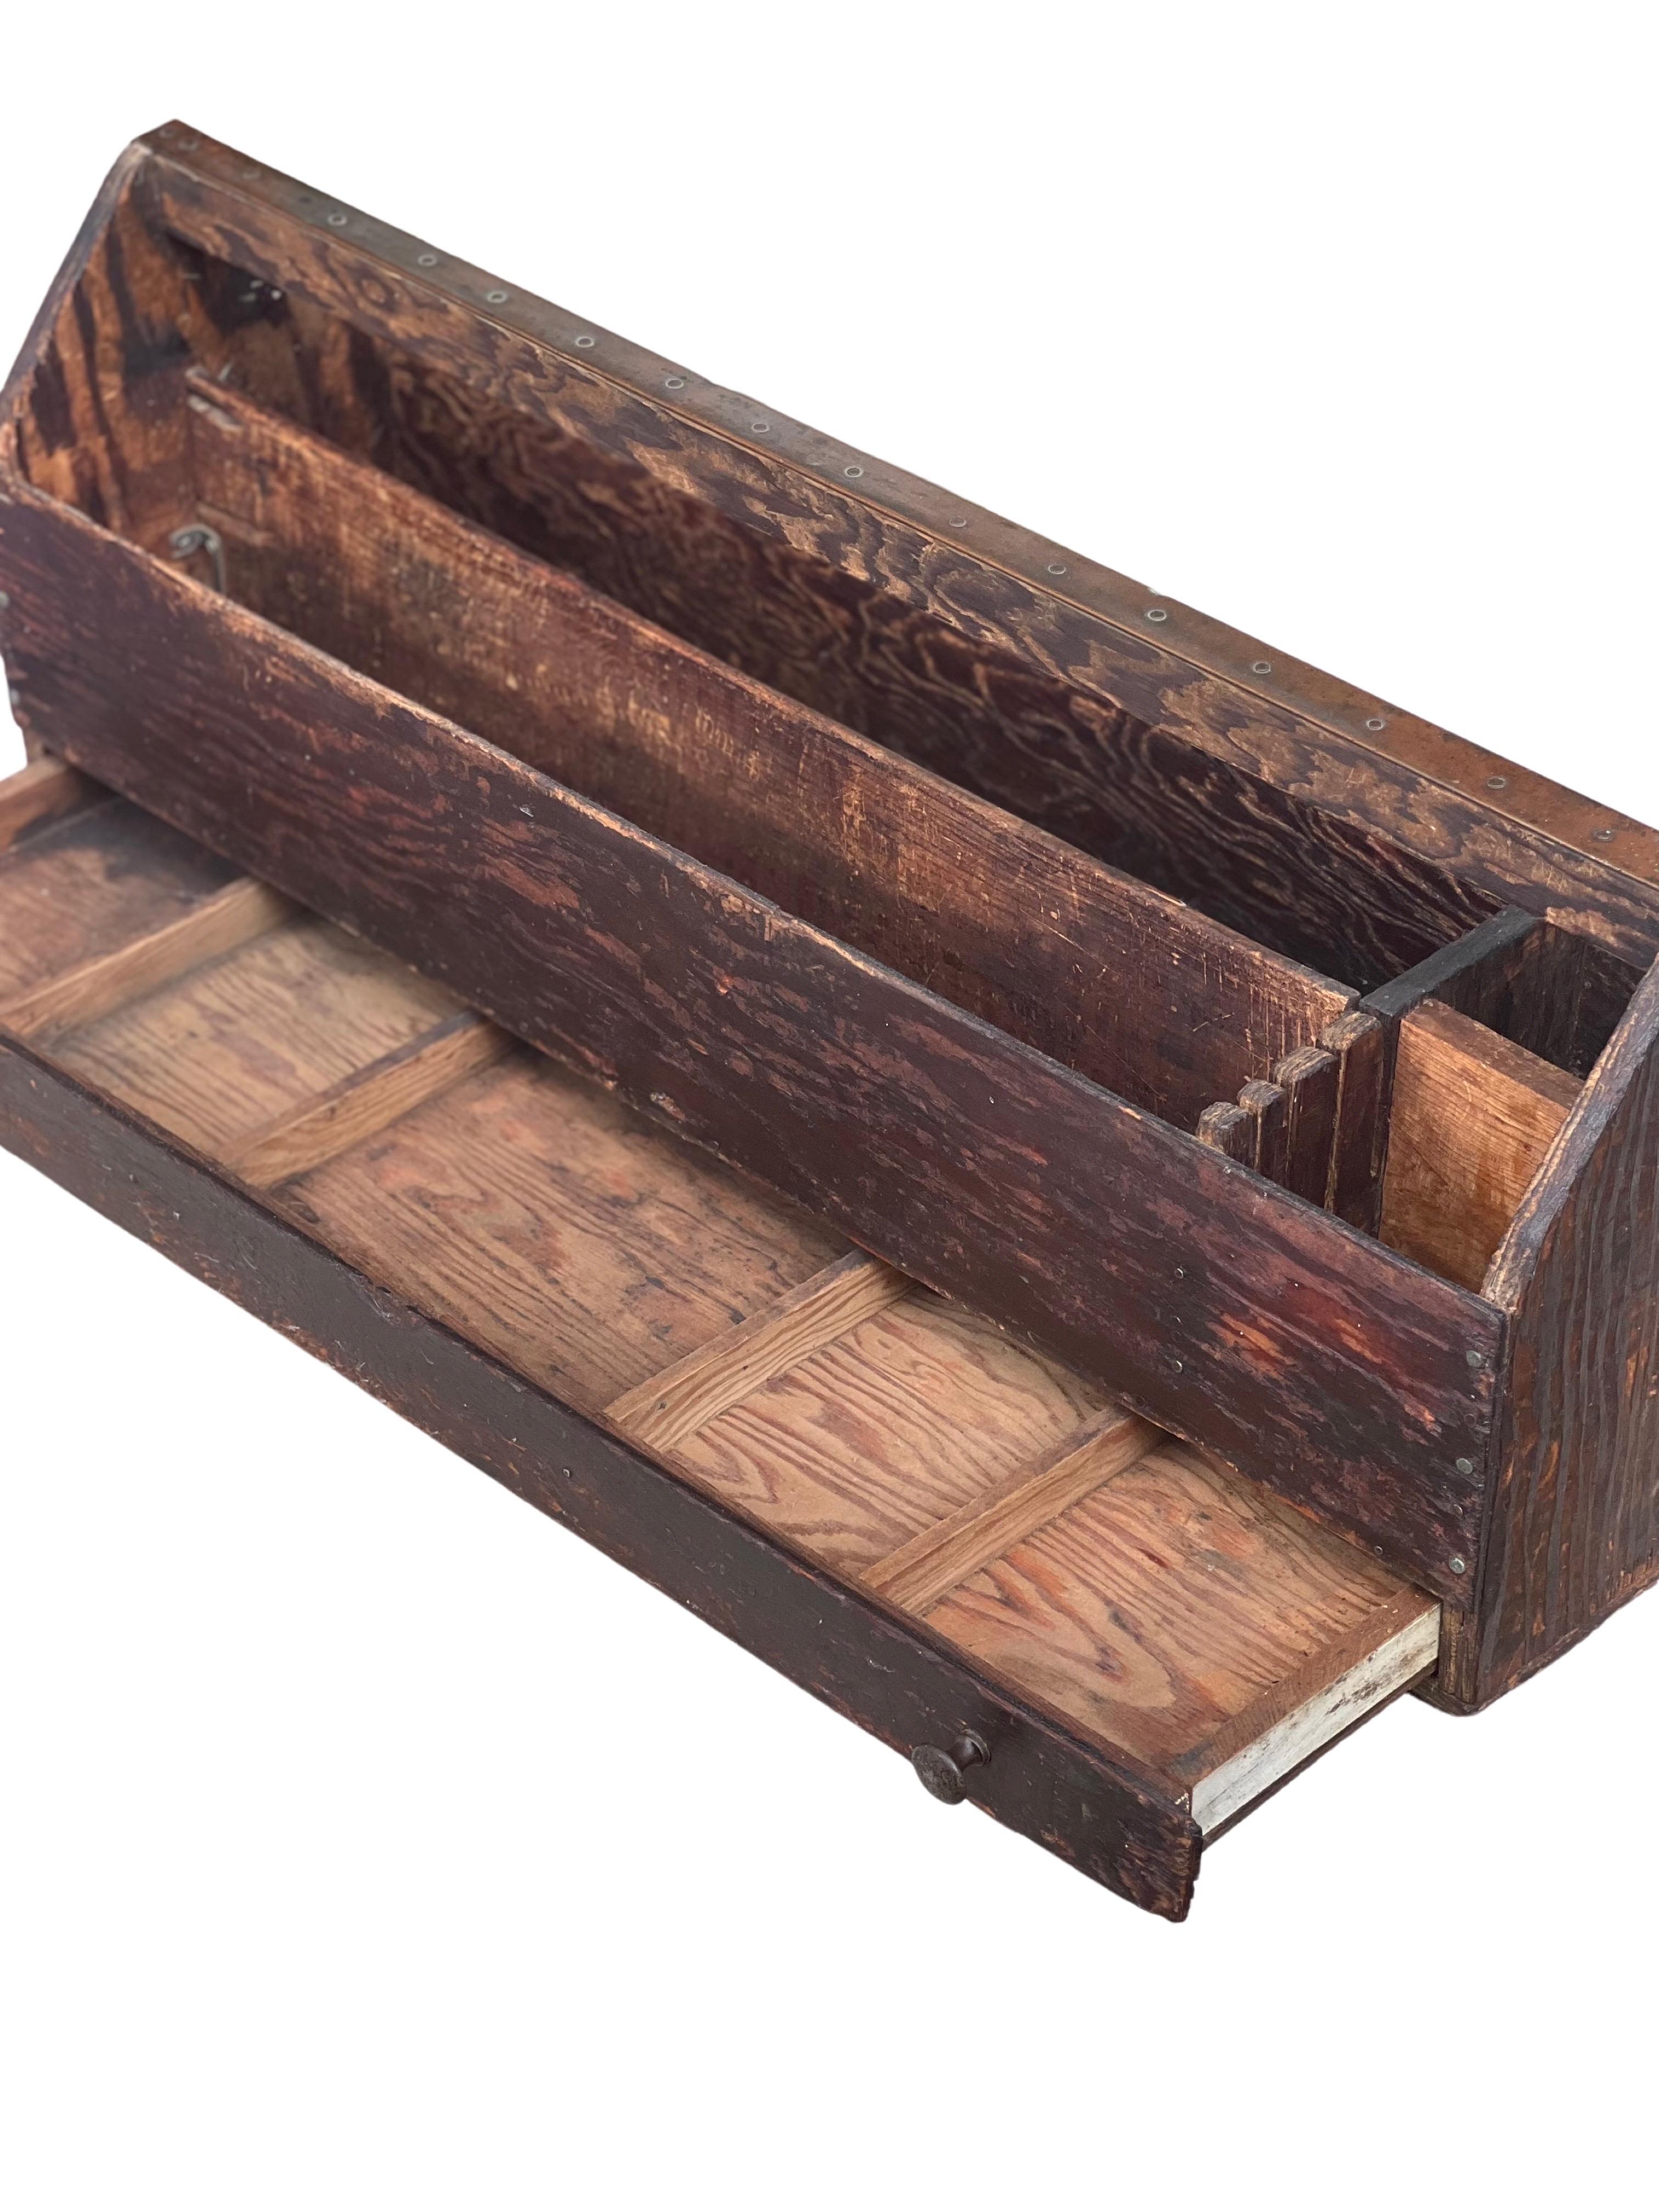 19th Century Antique Handcrafted Primitive Pine Tool Carrier or All-Purpose Caddy with Drawer For Sale